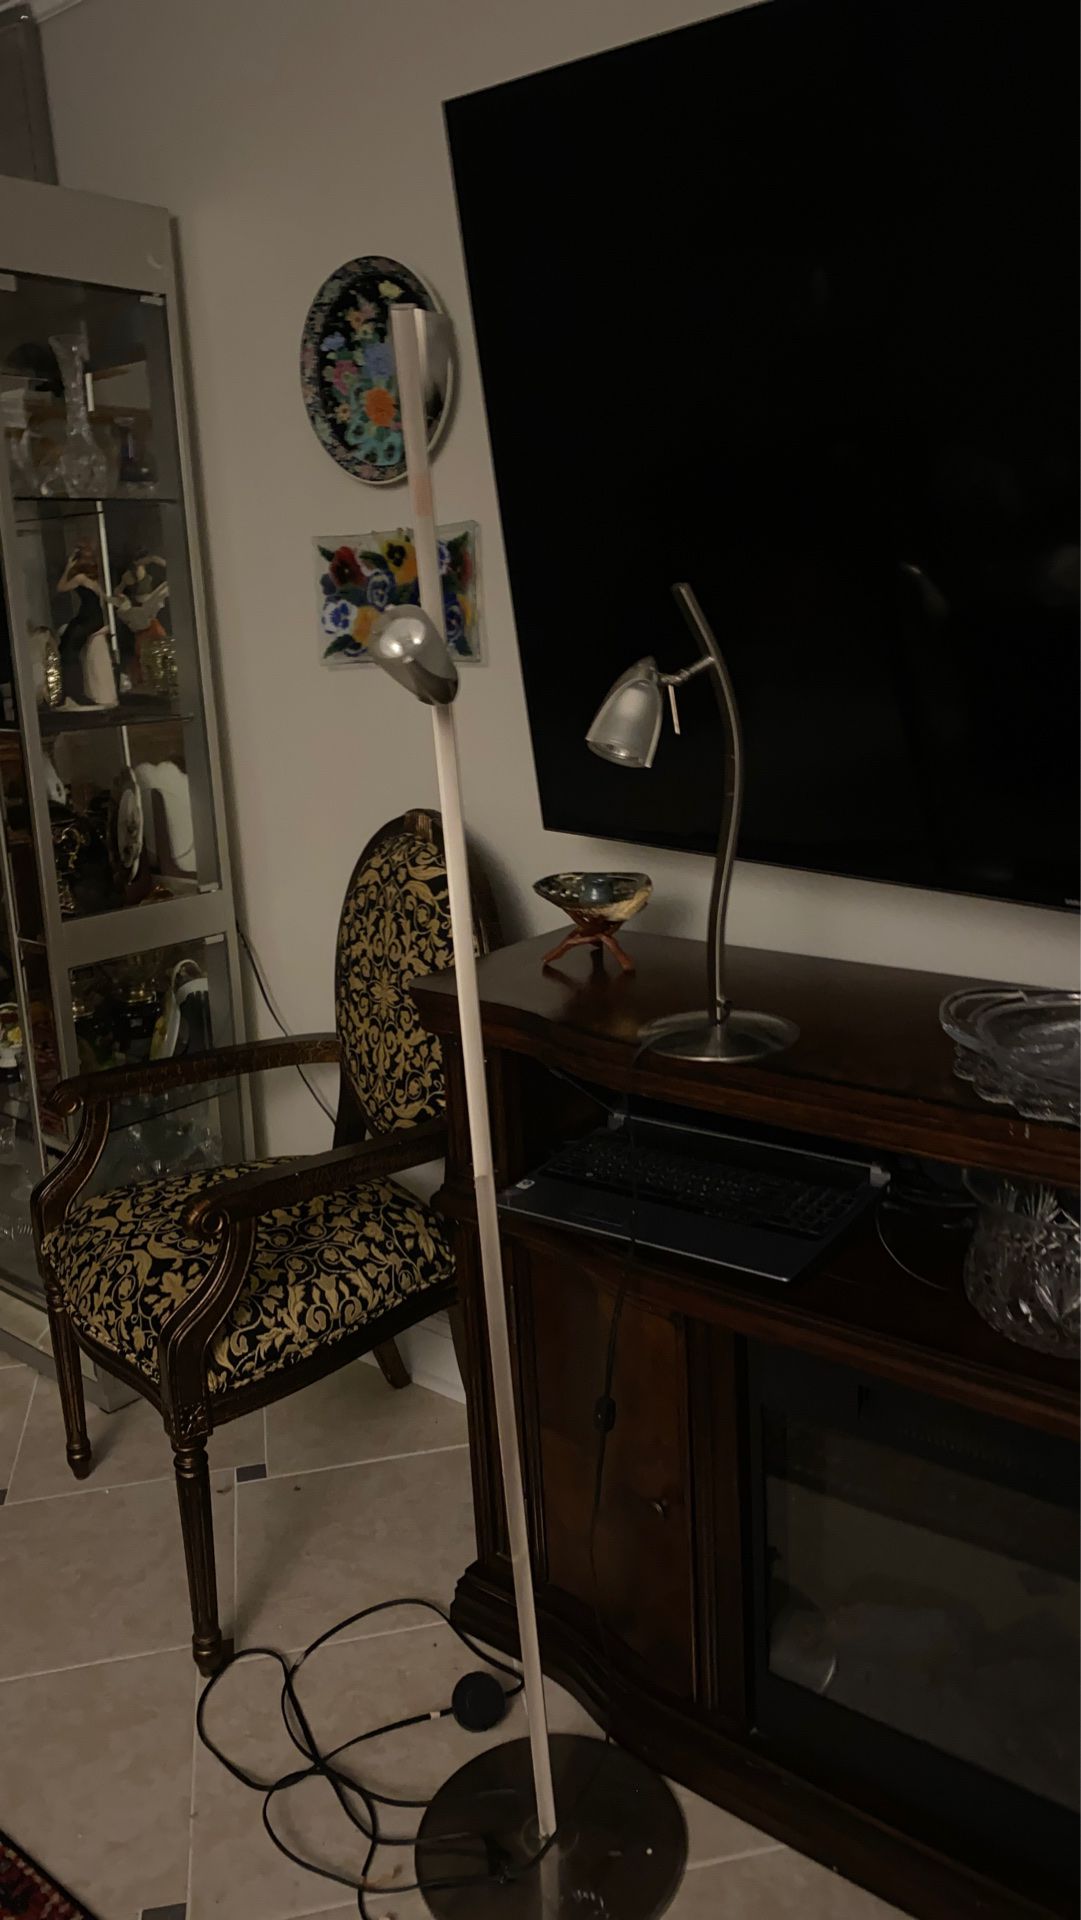 Floor lamp and night stand lamp